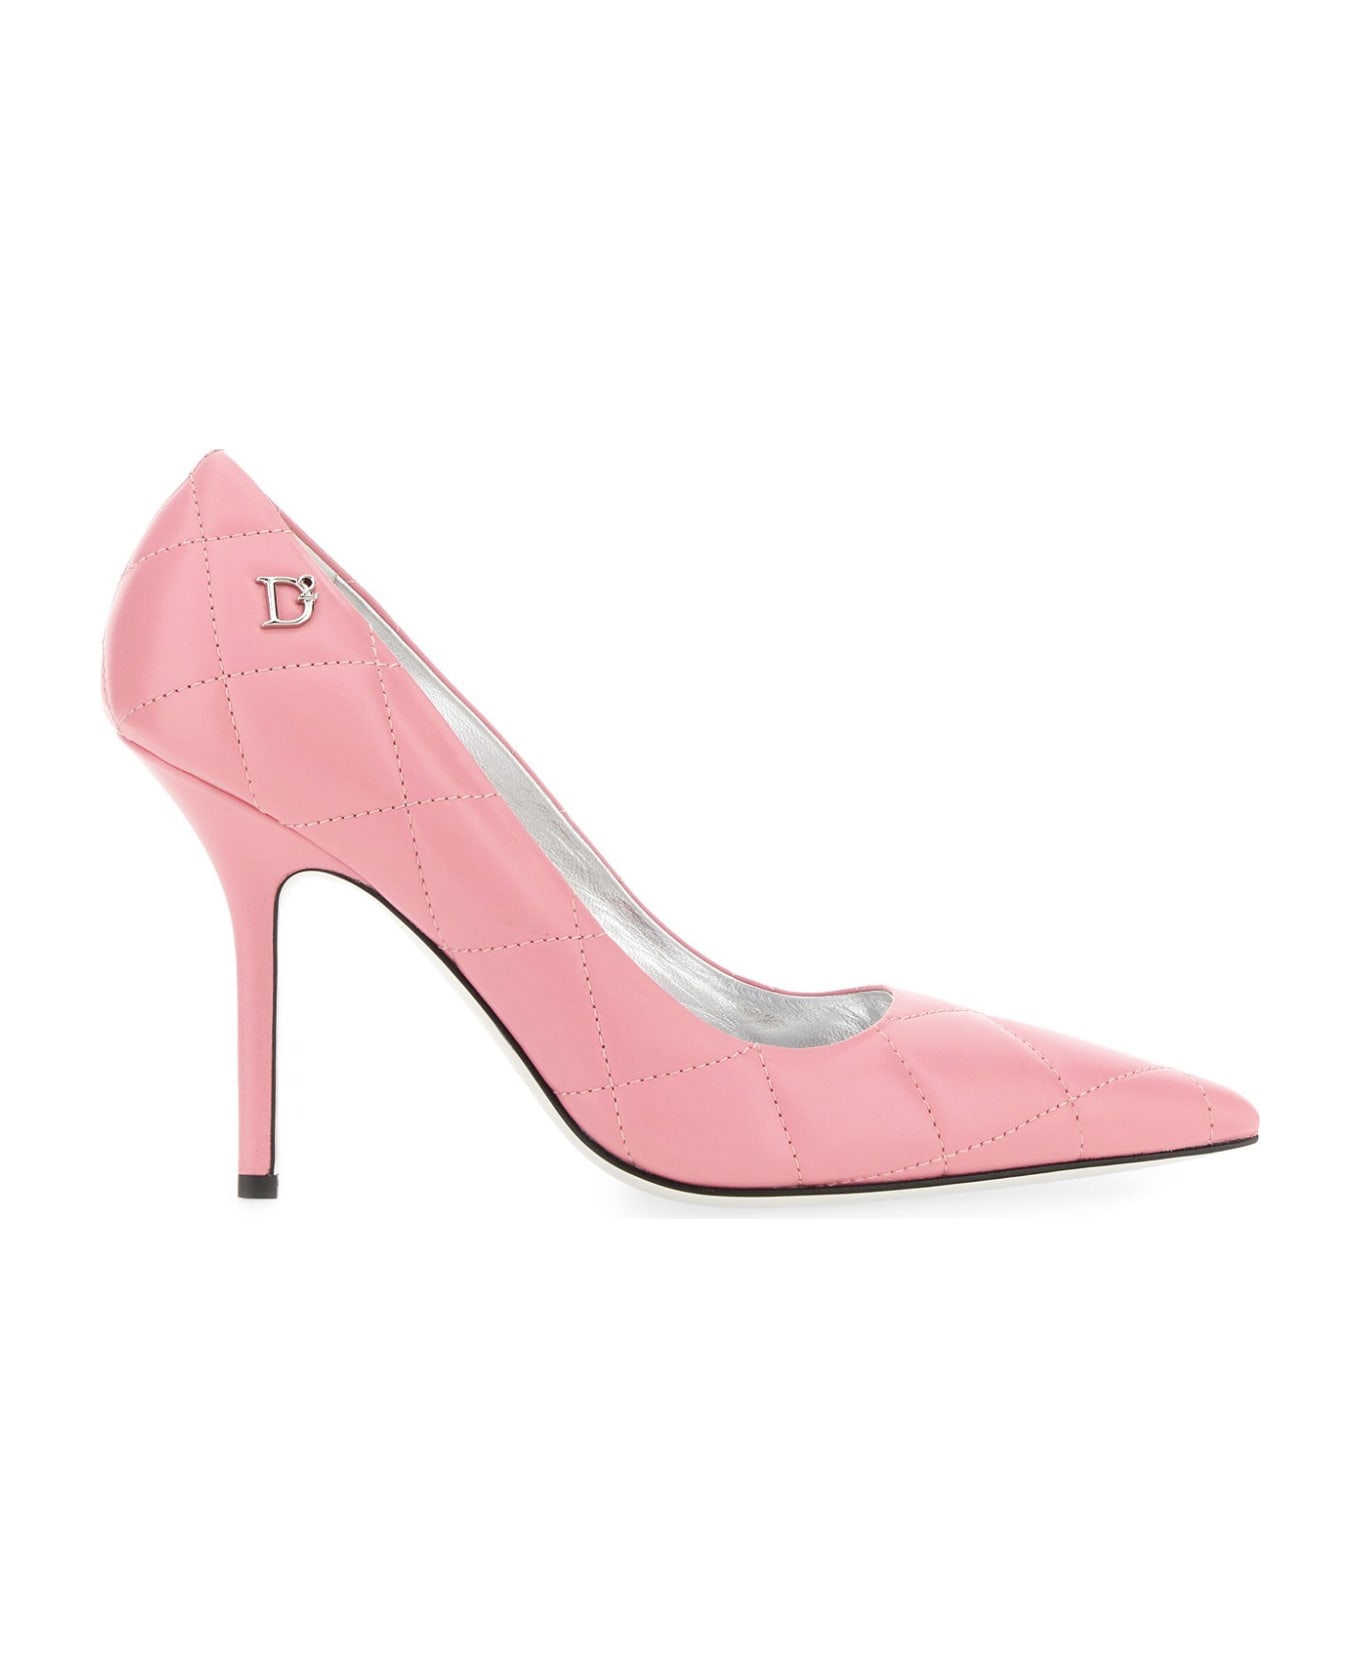 Dsquared2 Quilted Leather Pumps - ROSA ハイヒール